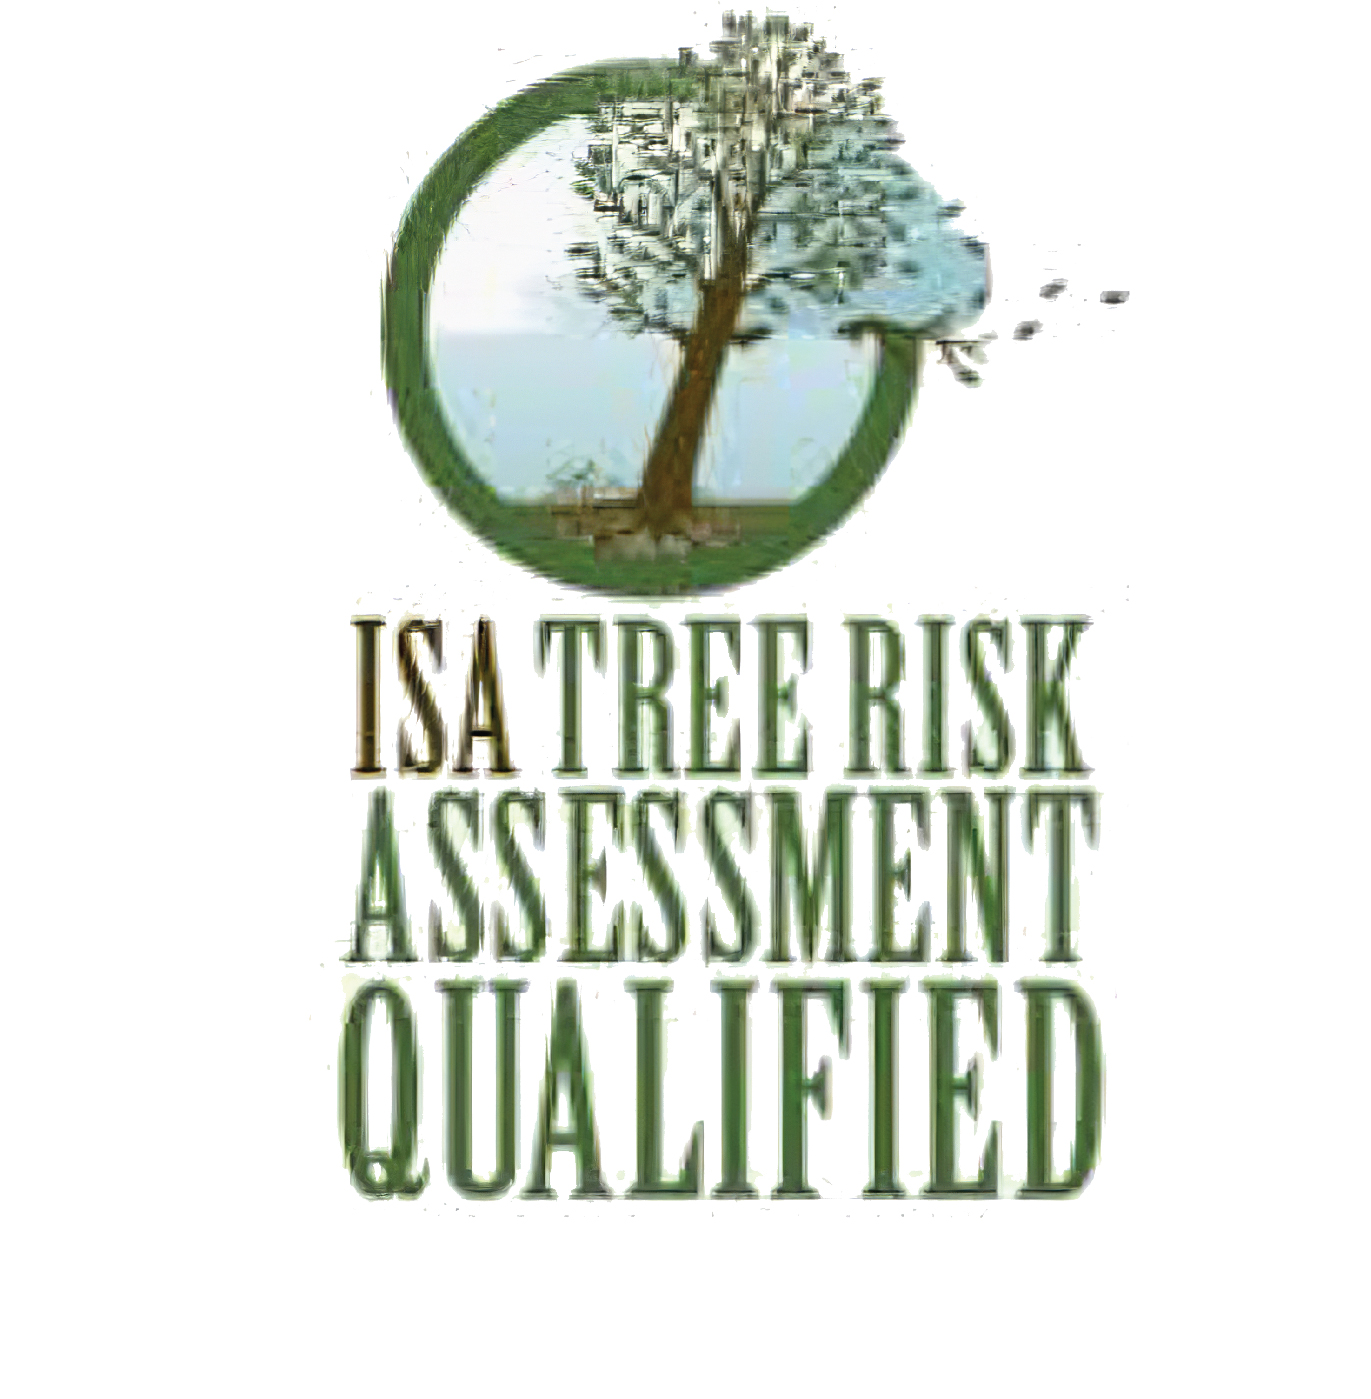 Tree Risk Assessment Qualified